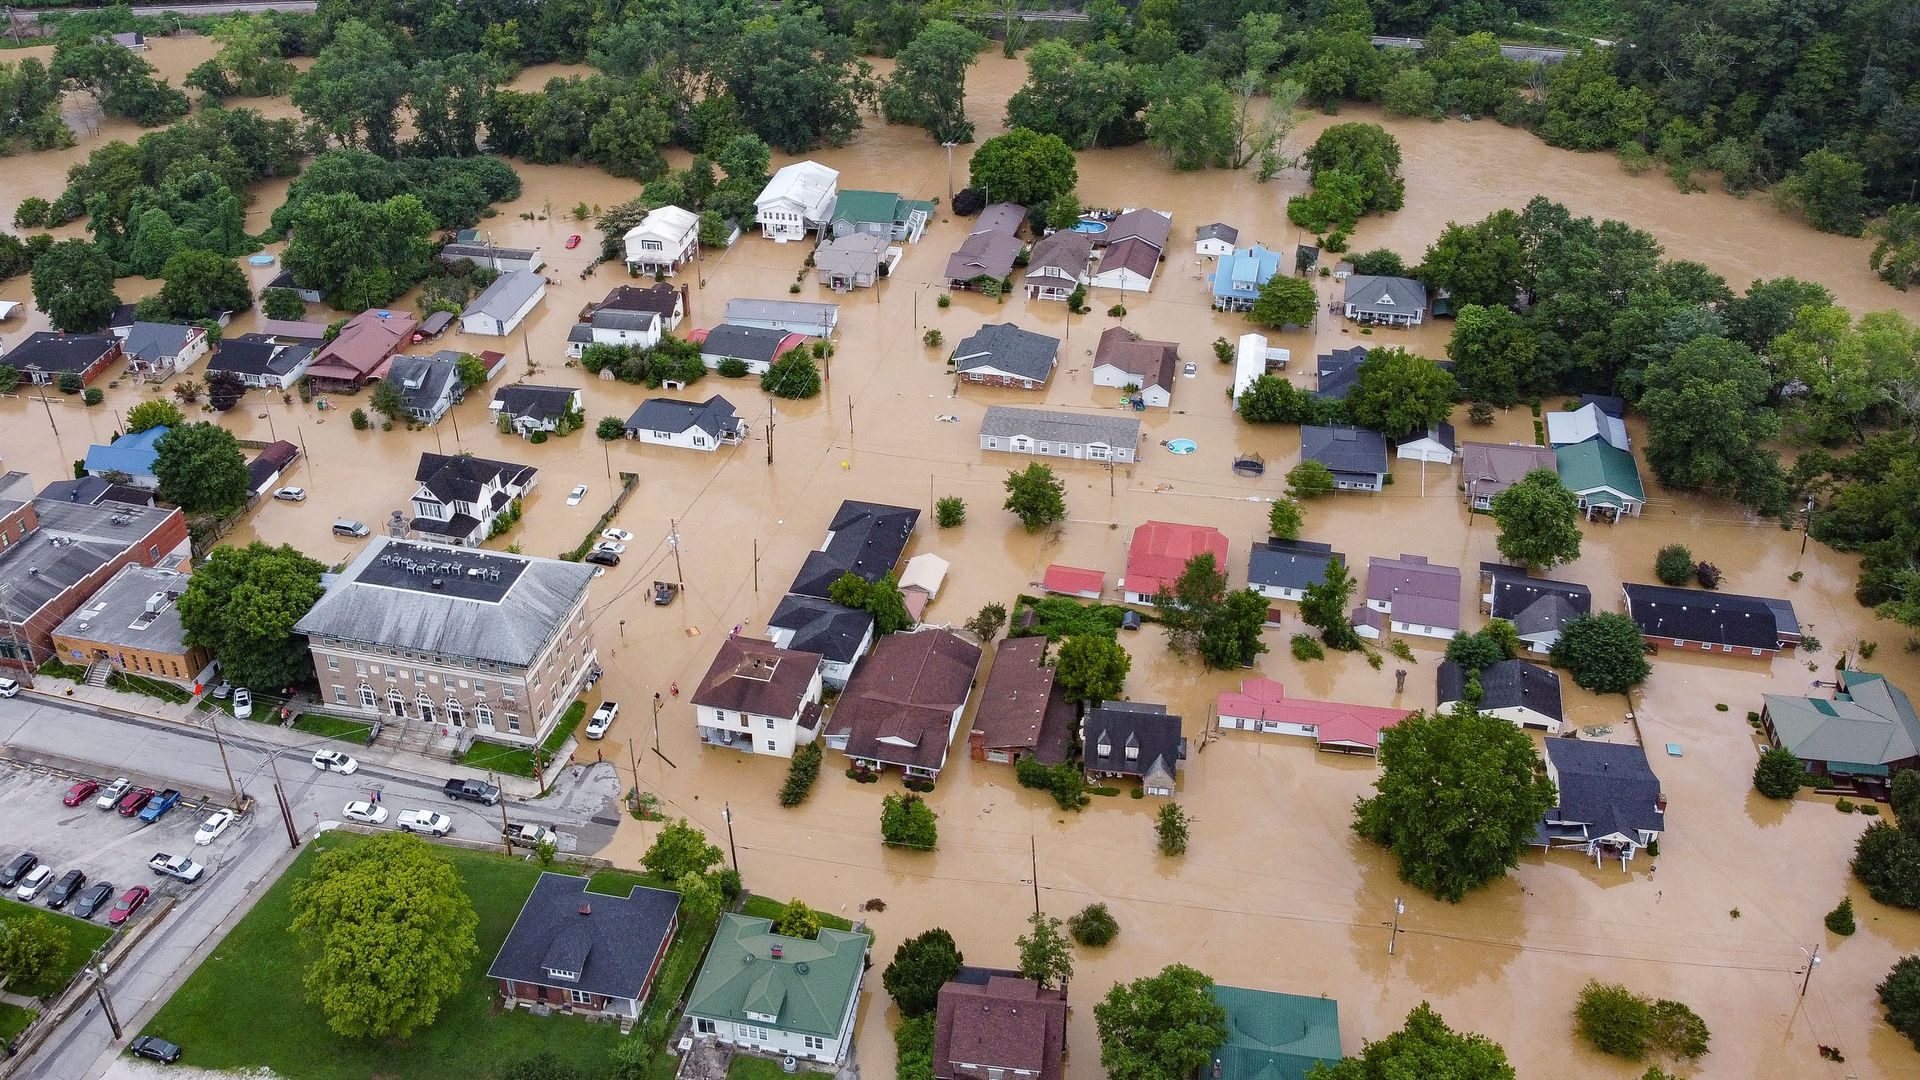 Aerial view of homes submerged under flood waters from the North Fork of the Kentucky River in Jackson, Kentucky, on July 28.